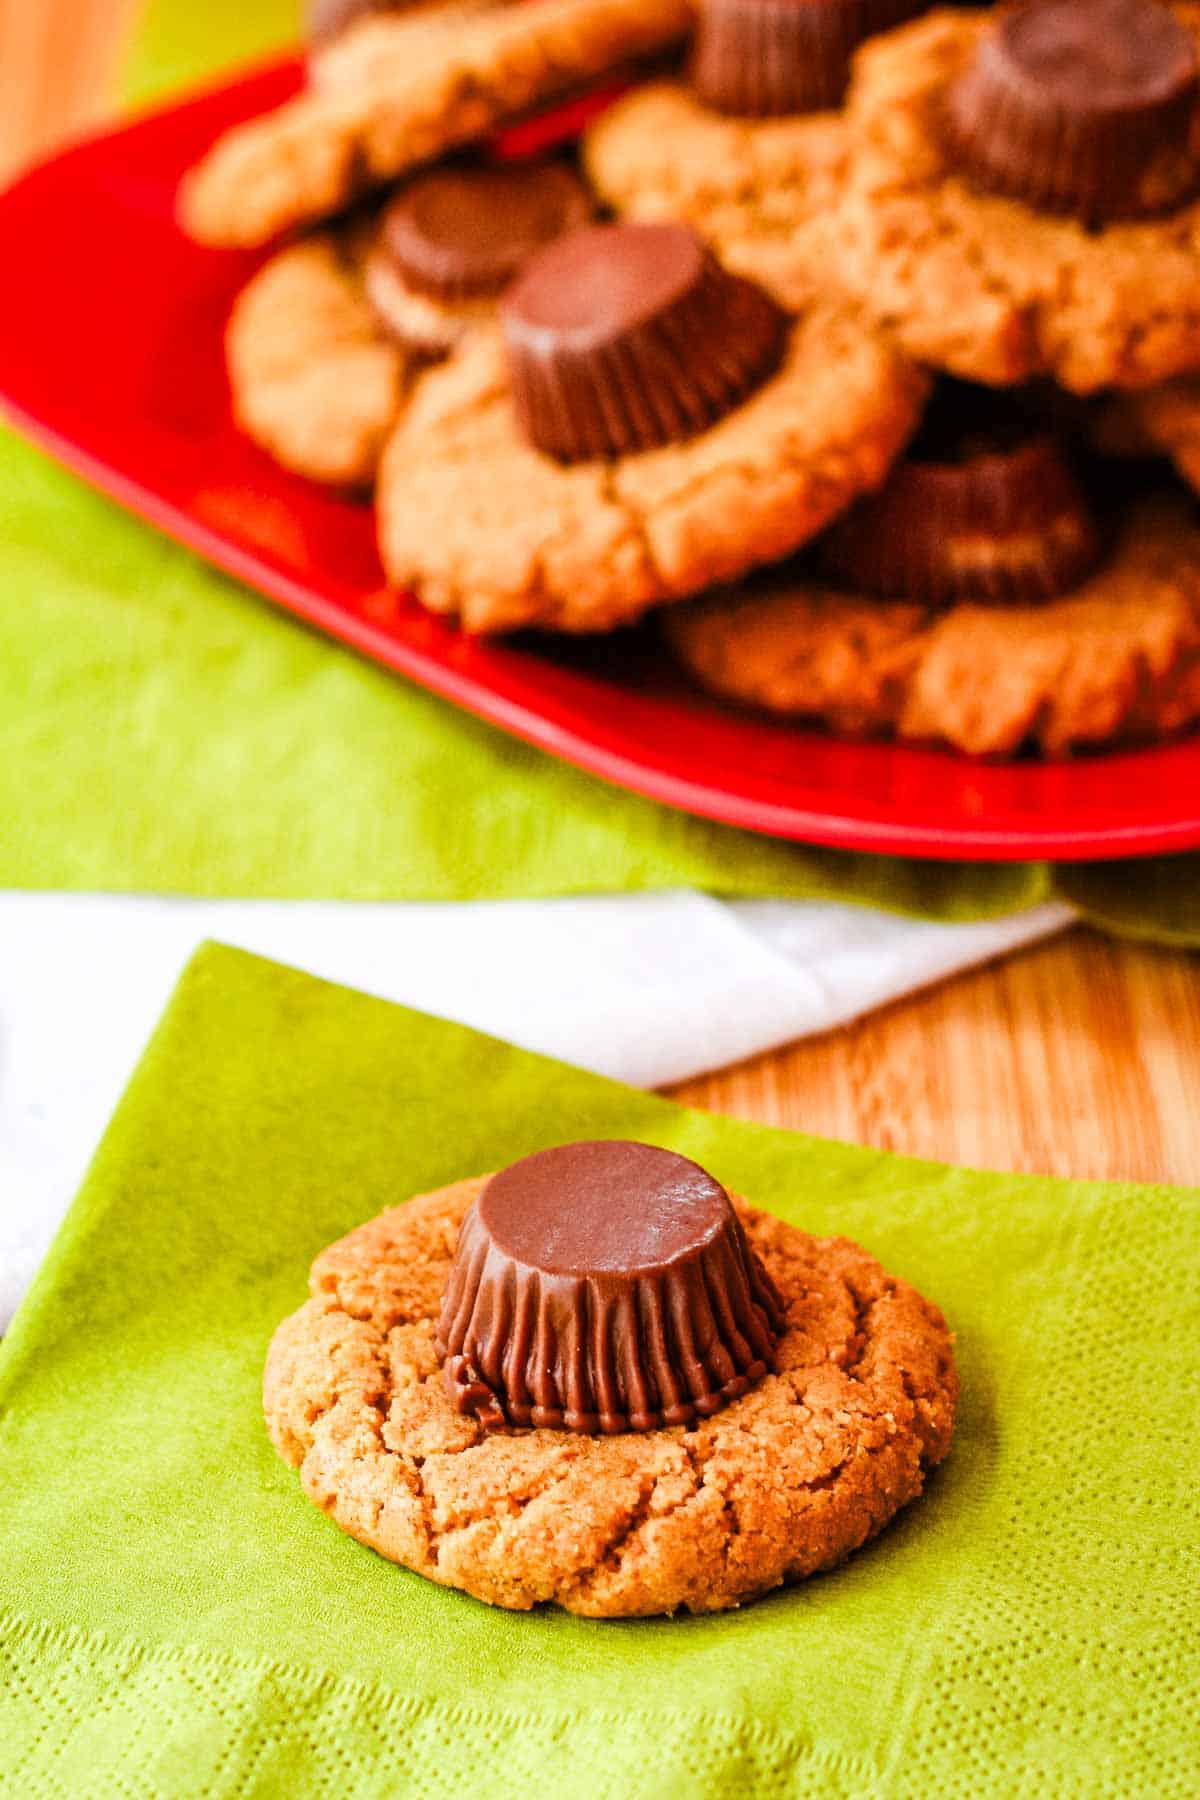 A peanut butter cookie topped with a Reese's peanut butter cup on a green napkin with more cookies on a red plate in the background.